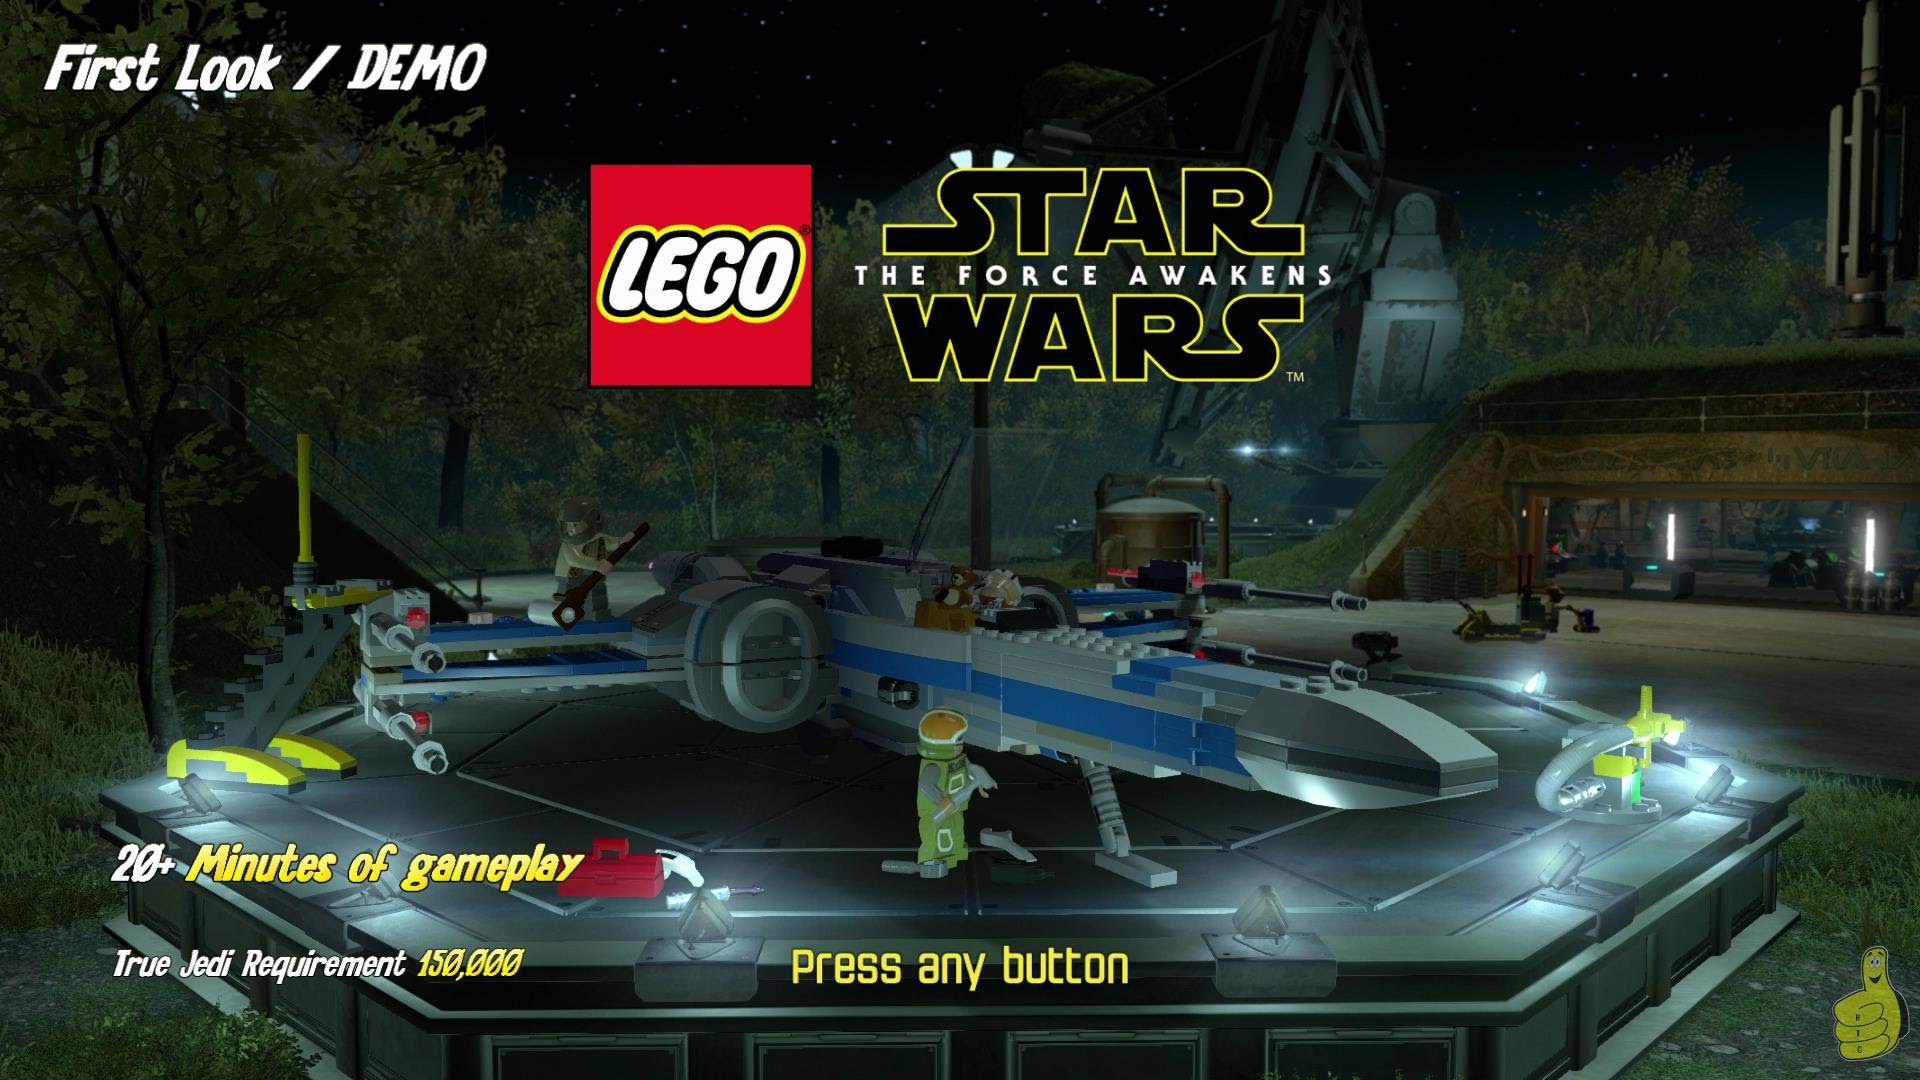 Lego Star Wars The Force Awakens: First Look / DEMO (20+ Min of gameplay) – HTG